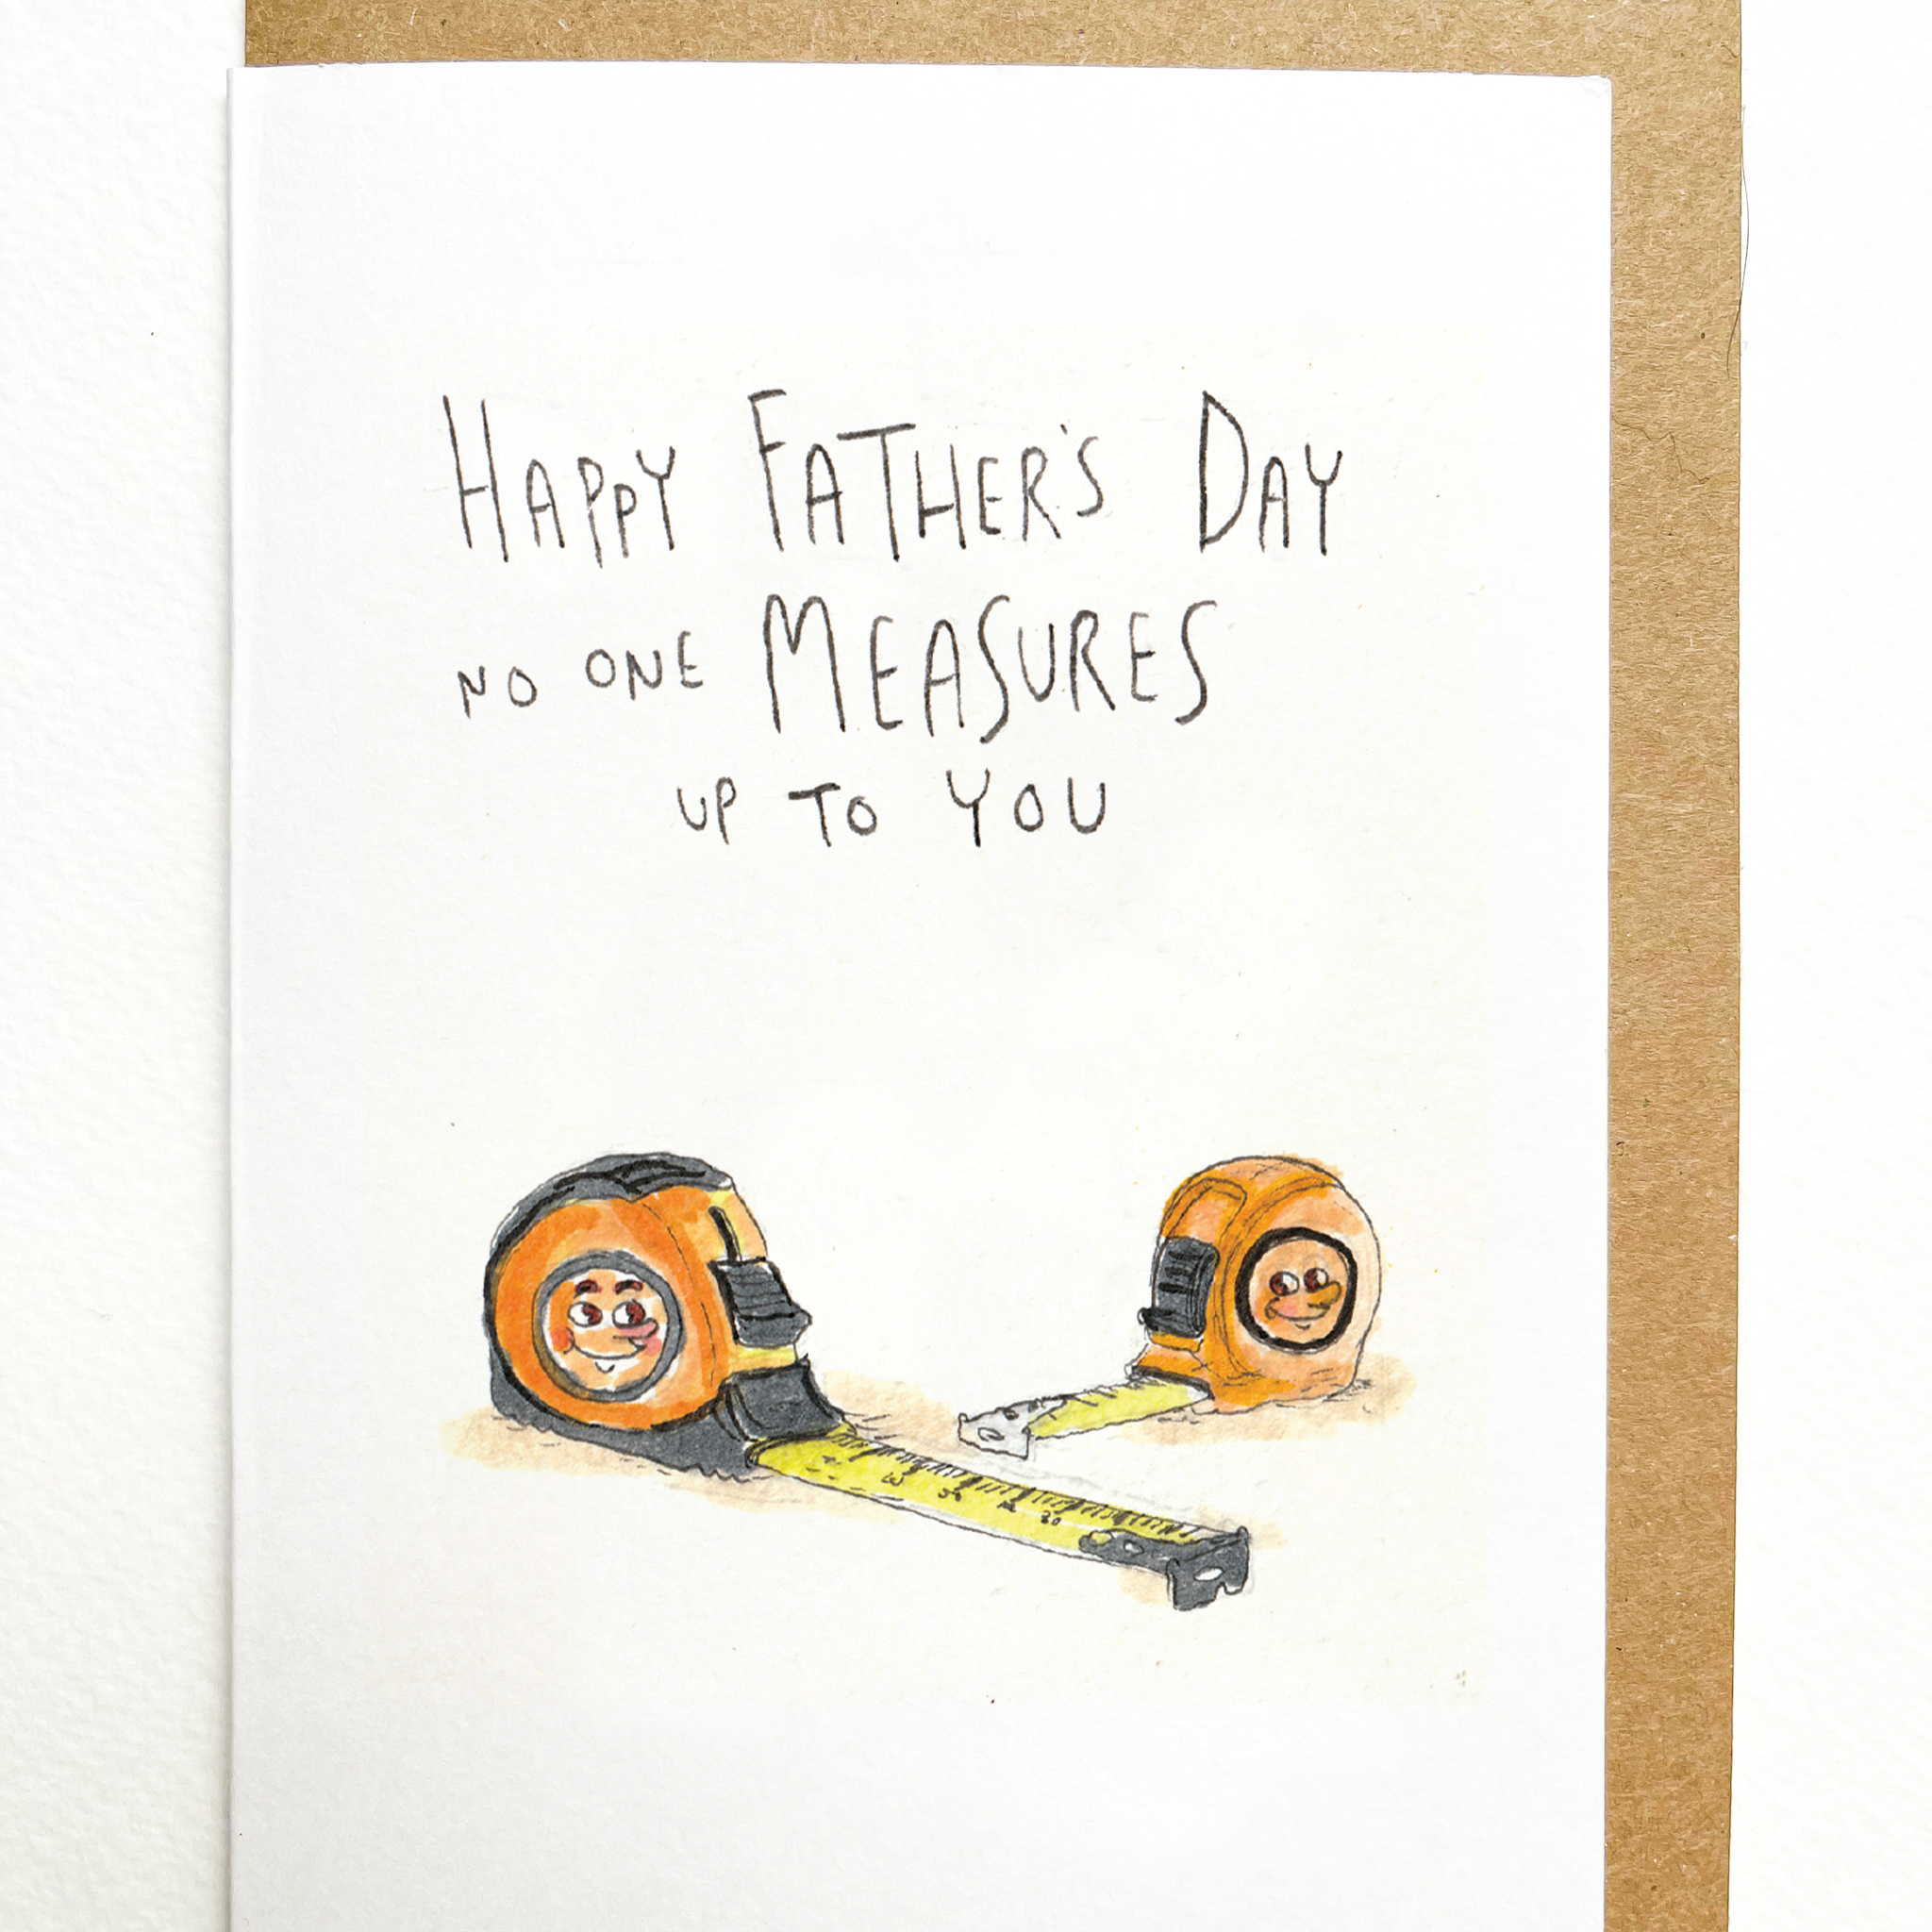 Happy Father's Day, No One Measures up to You